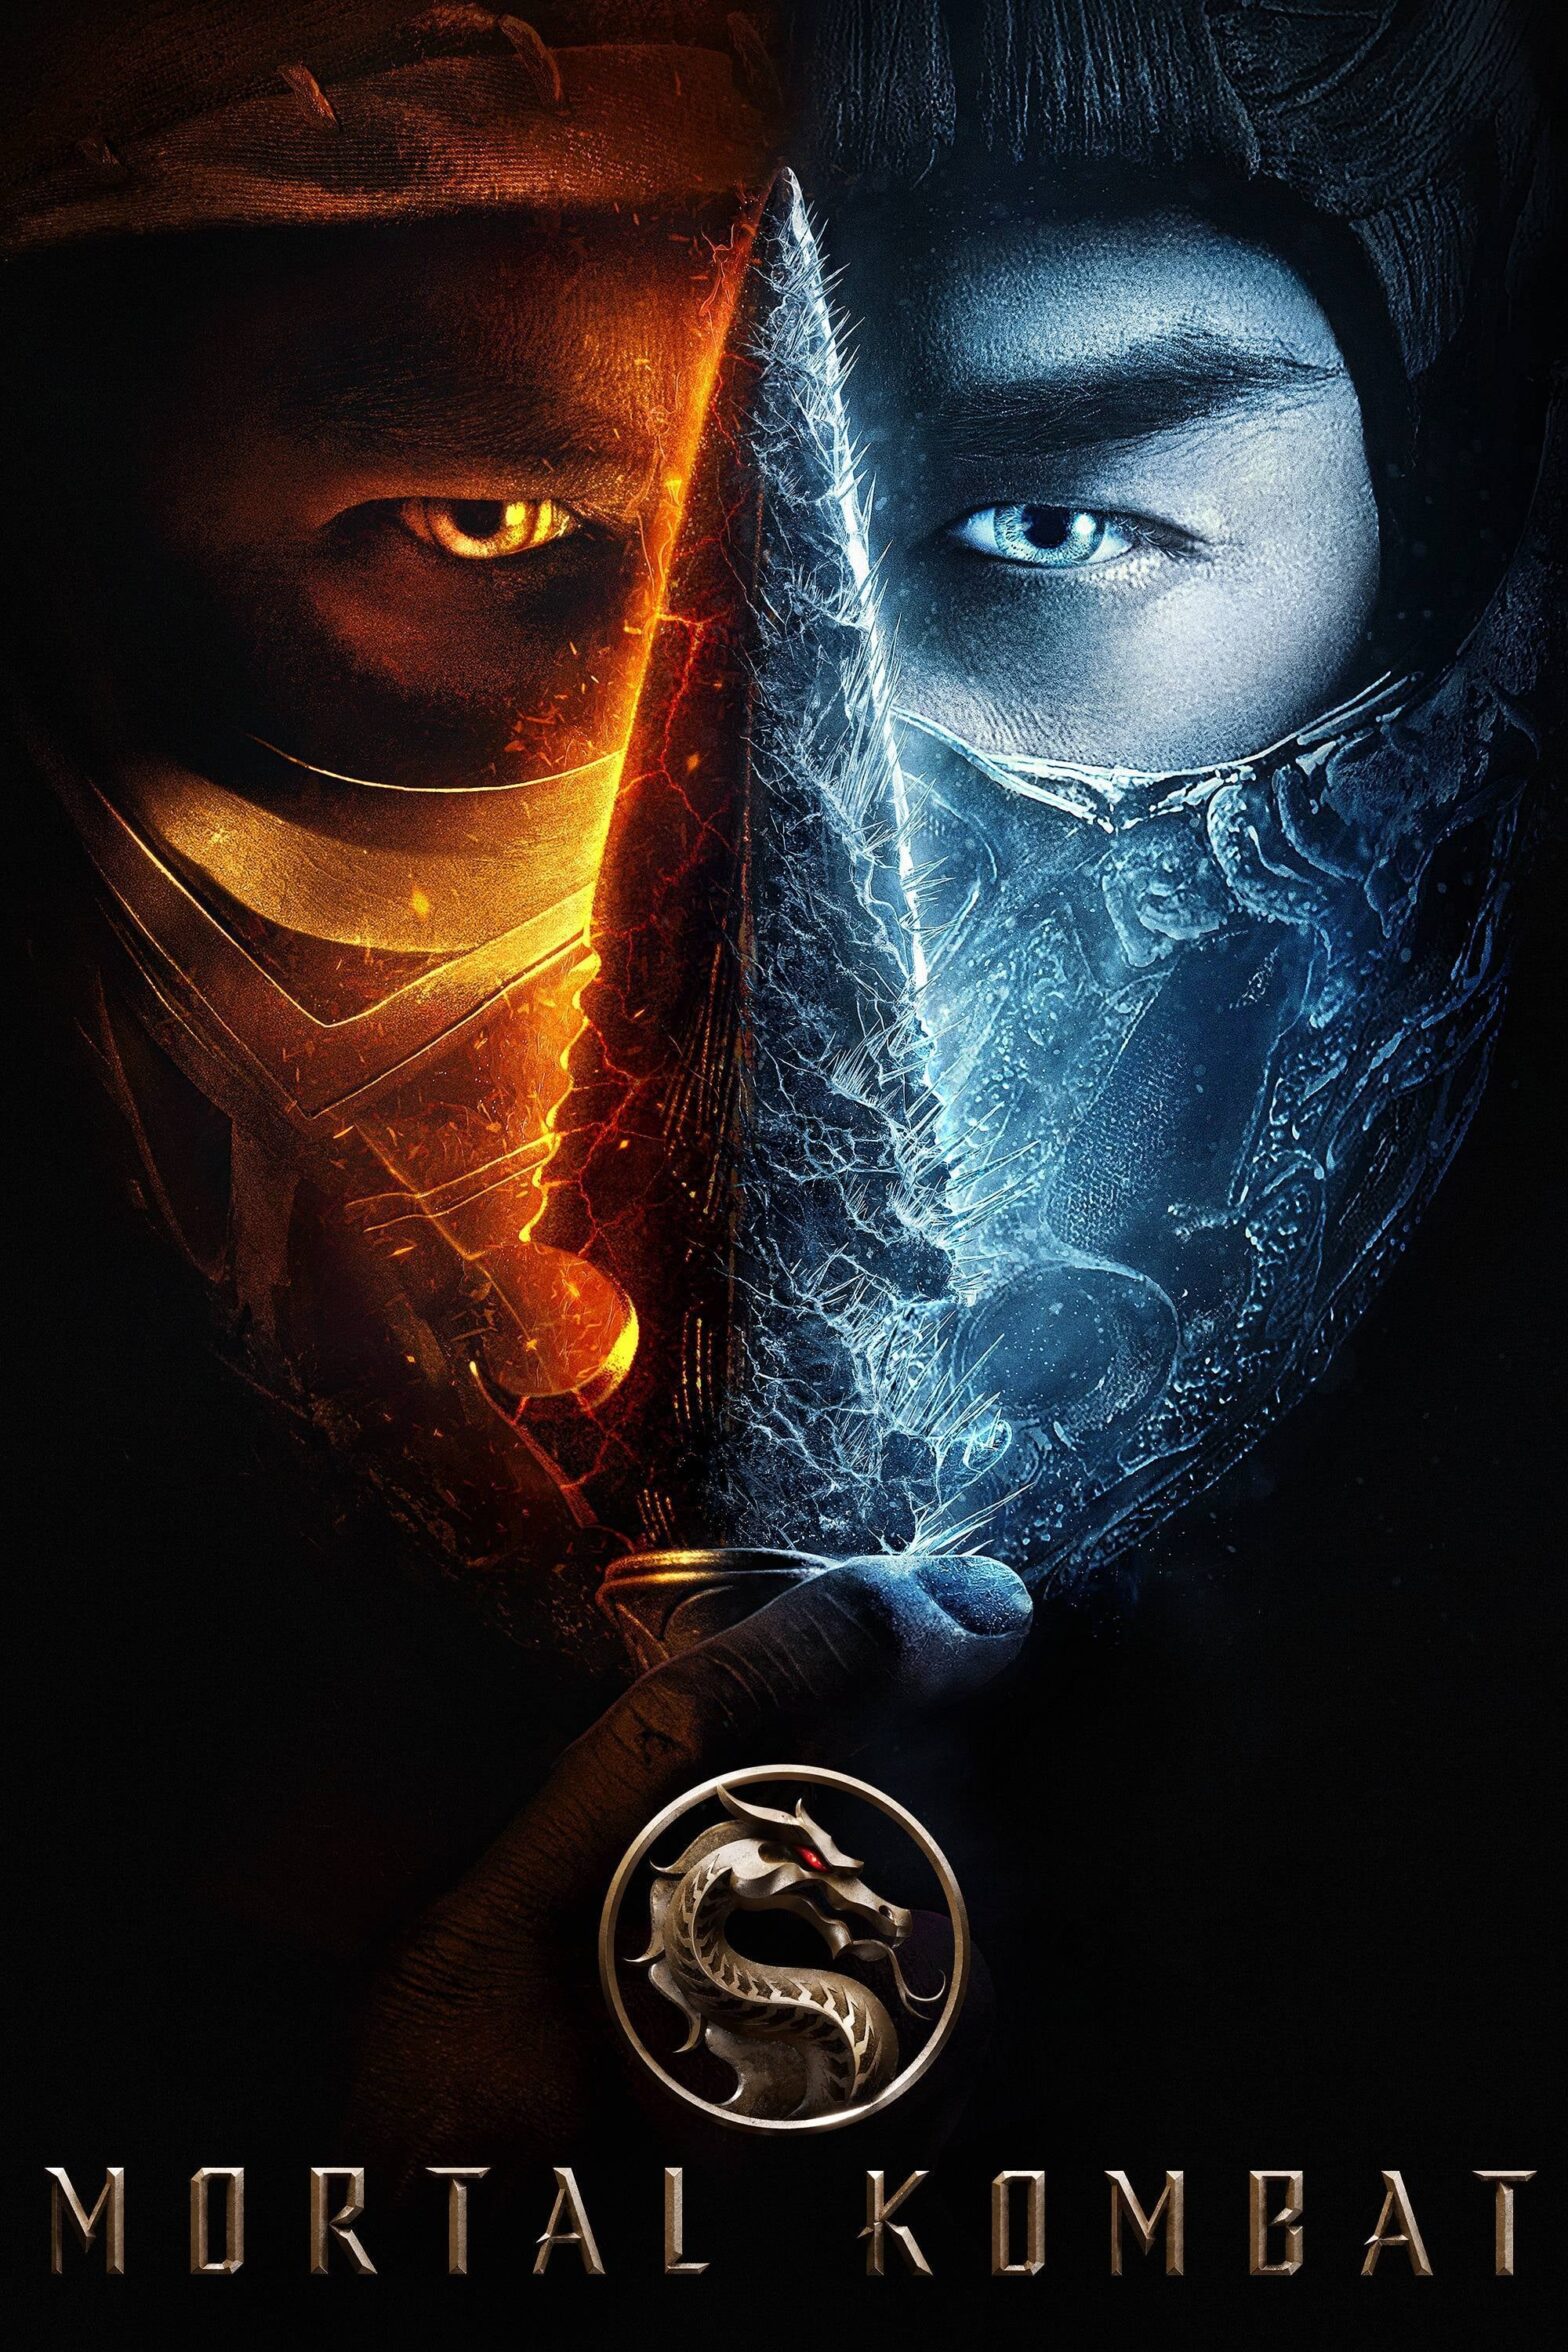 Poster for the movie "Mortal Kombat"